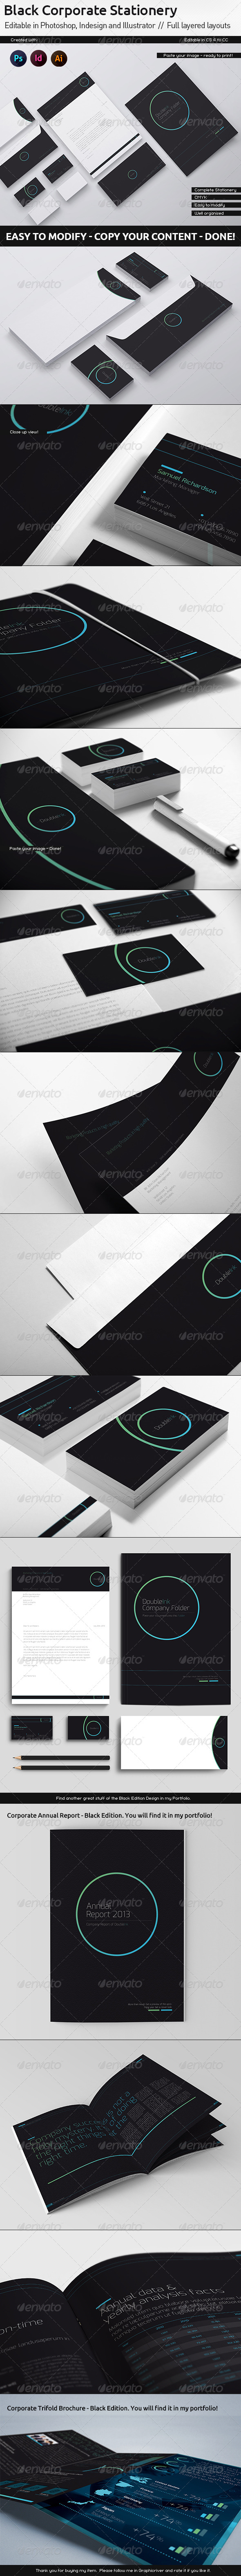 DoubleInk Corporate Stationery - Black Edition by egotype | GraphicRiver